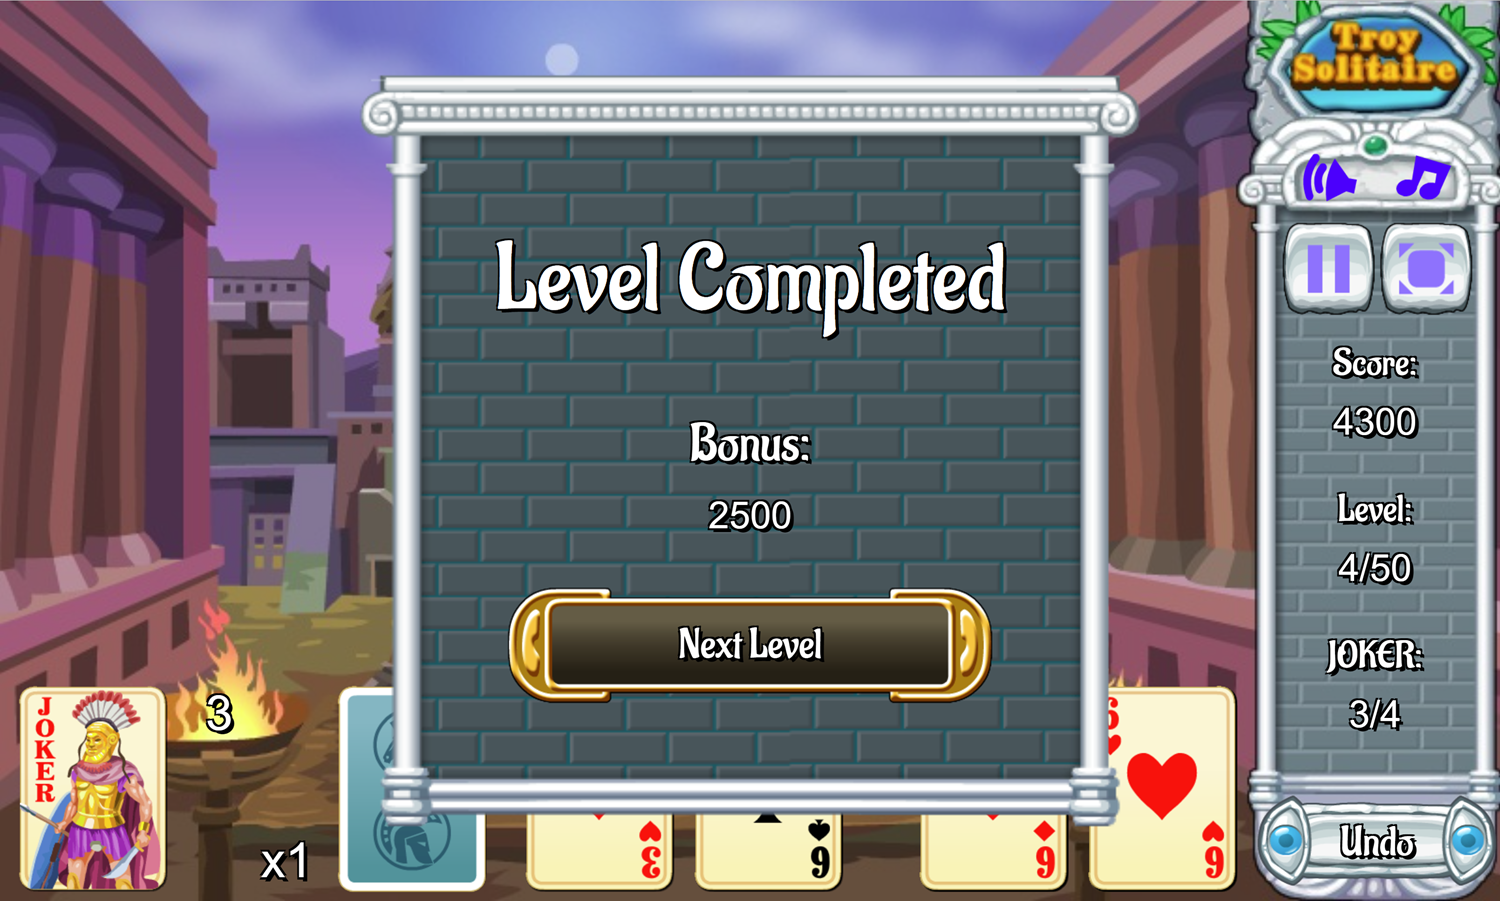 Troy Solitaire Game Level Completed Screen Screenshot.